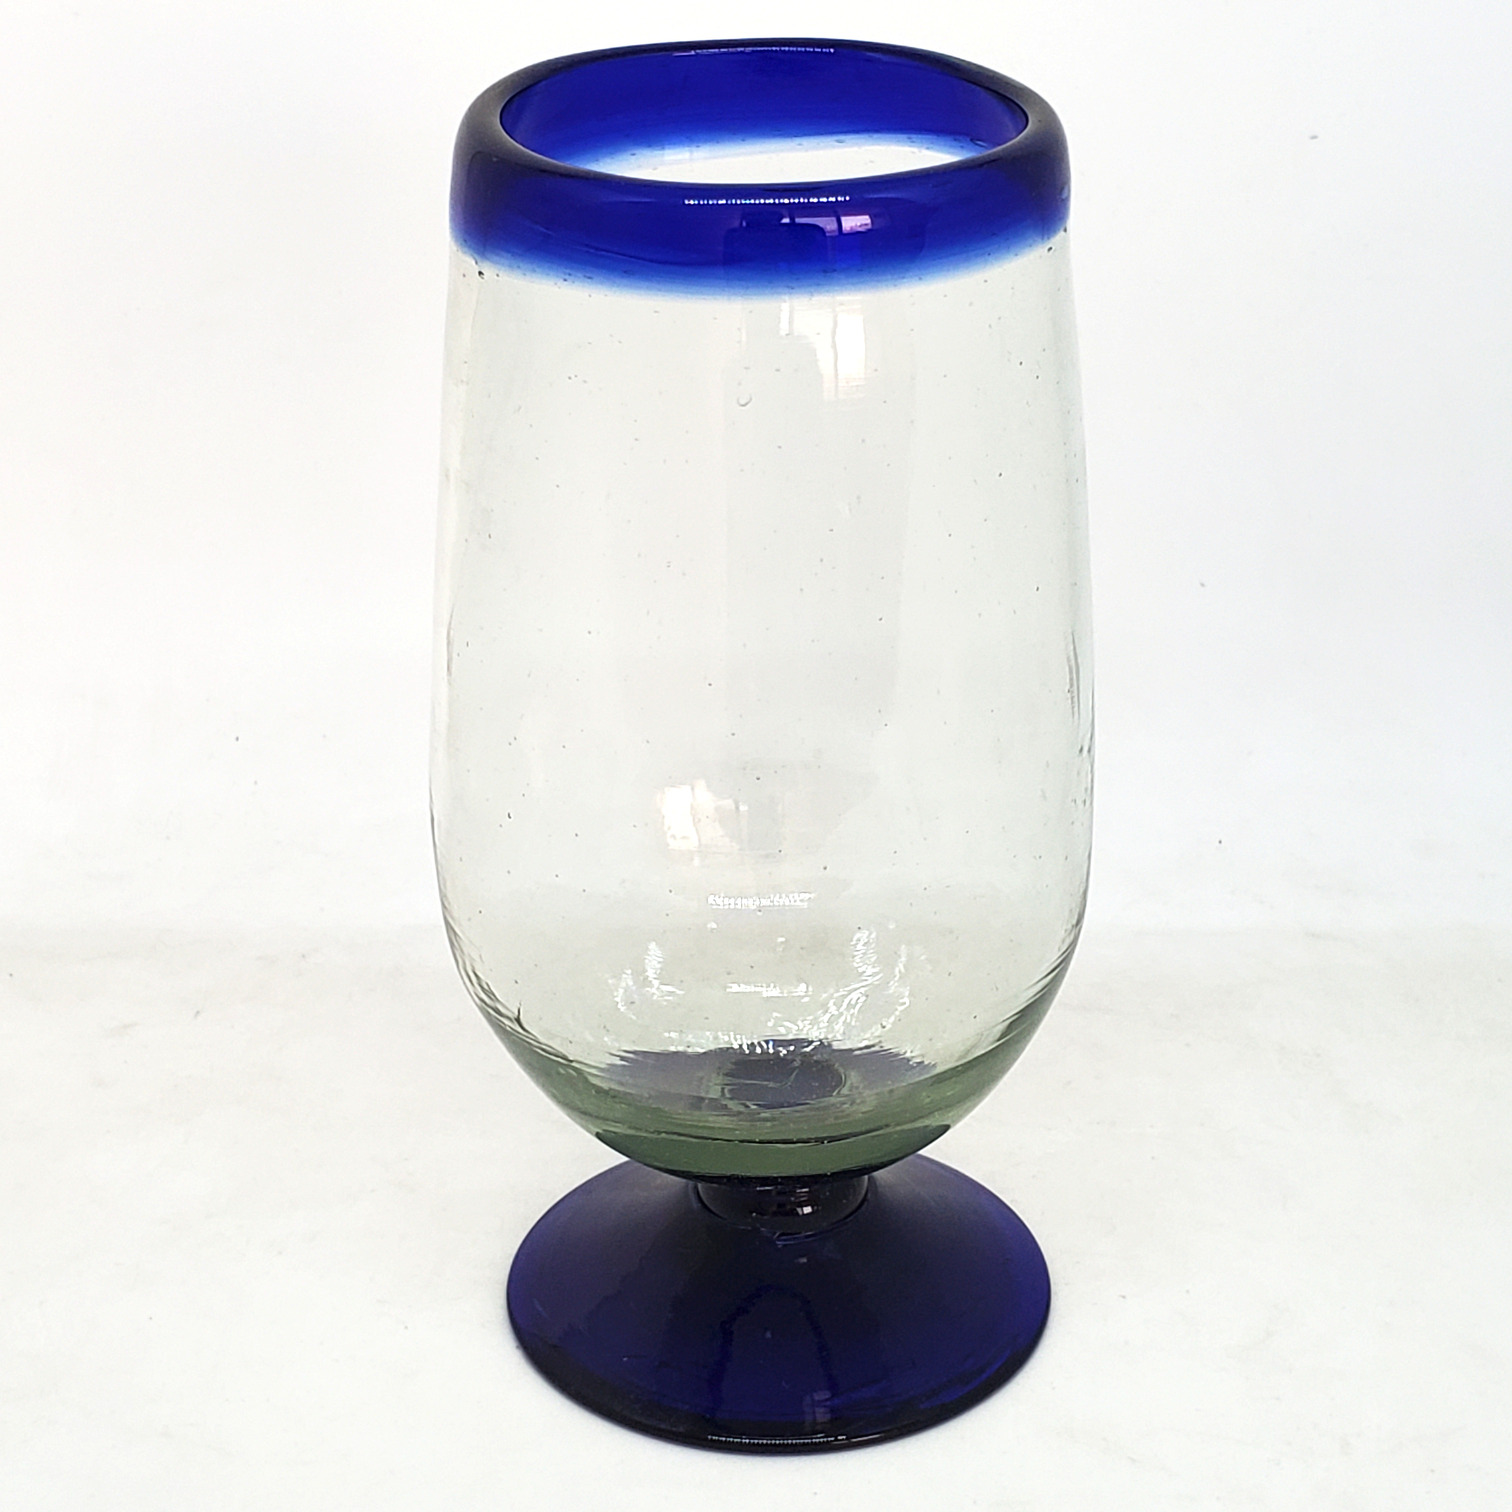 Wholesale Cobalt Blue Rim Glassware / Cobalt Blue Rim 17 oz Tall Water Goblets  / These tall water goblets will embellish your table setting and give it a festive feel. Made from authentic hand blown recycled glass.